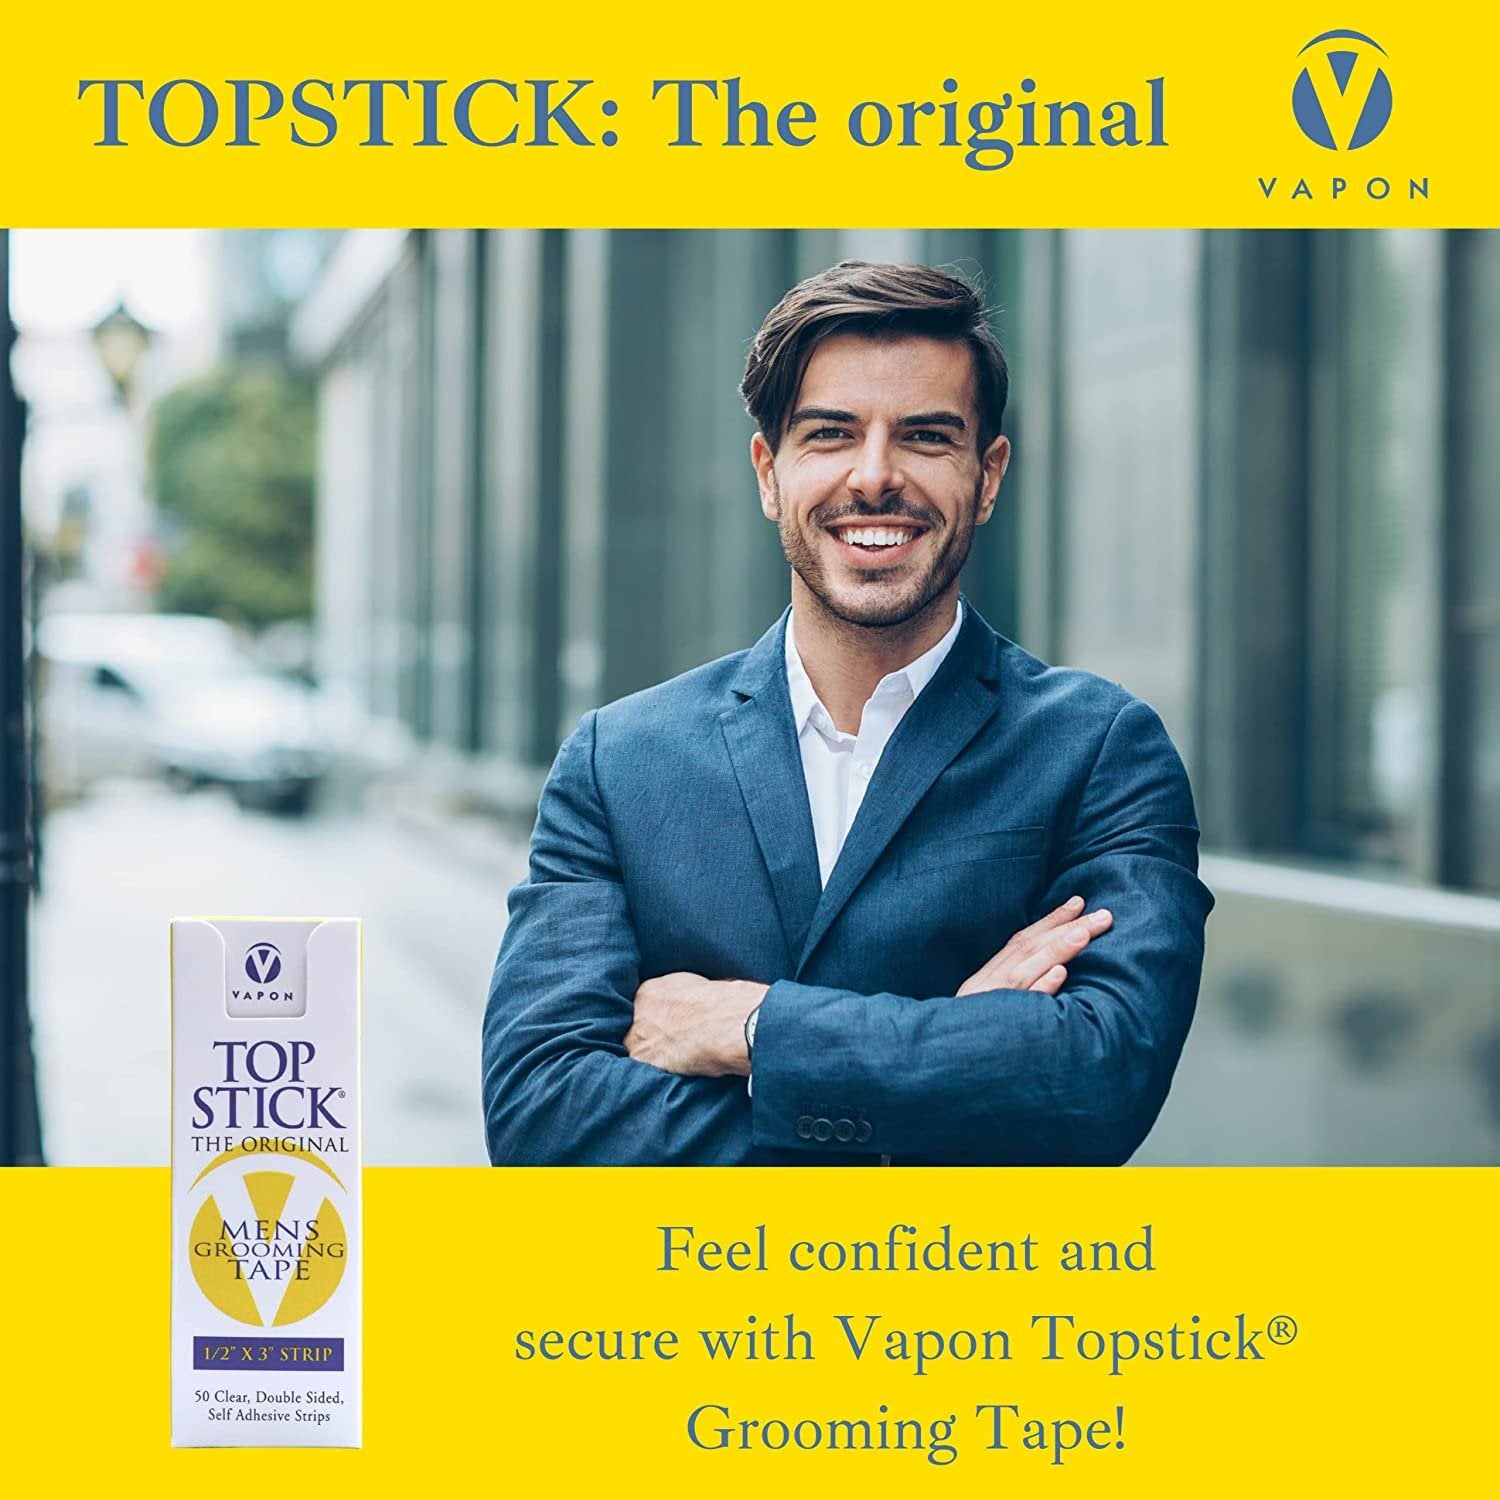 Vapon Topstick - The Original Men's Grooming Tape - 50 Count 1/2" x 3" Double Sided, Self Adhesive, Clear Tape for Toupee and Wig Adhesion - Hypo Allergenic, Waterproof, and Latex Free